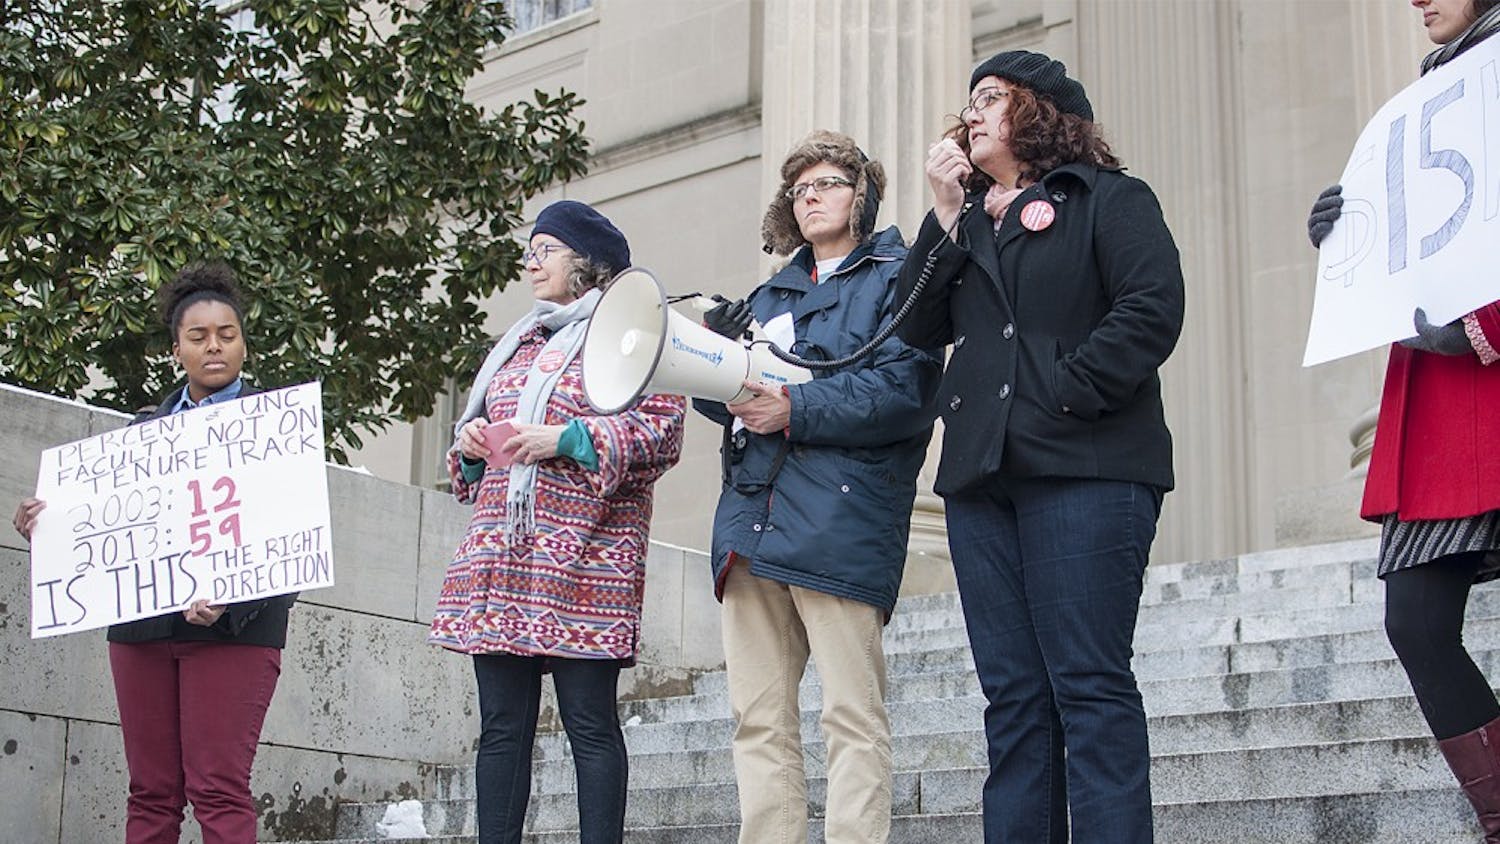 Didem Turkoglu (right), a teaching assistant and doctoral candidate in the sociology department, spoke at the rally Wednesday.